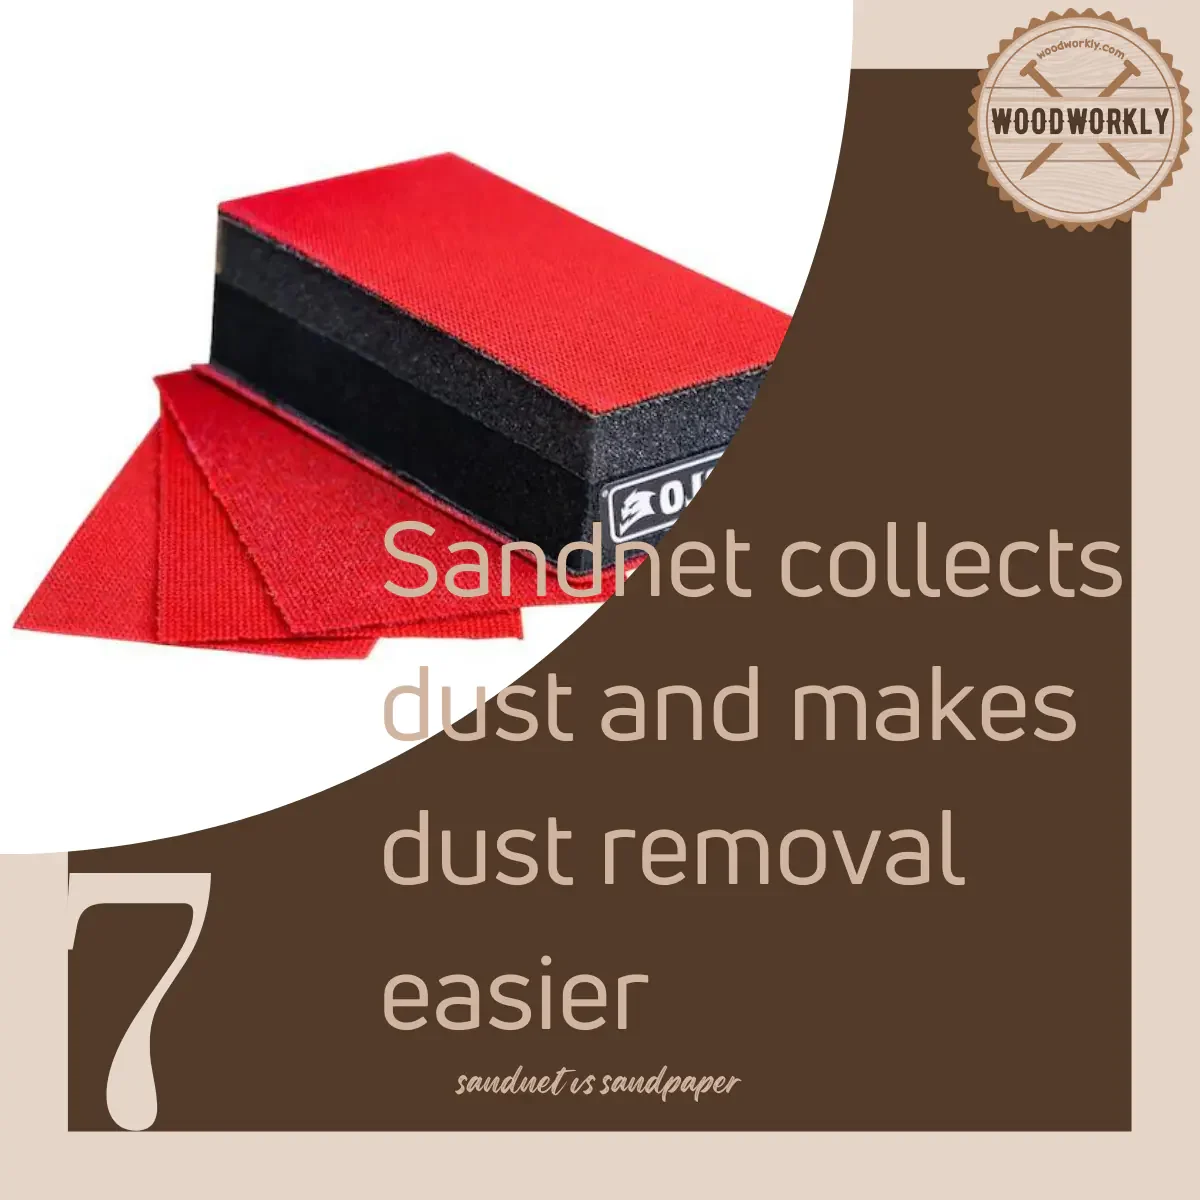 Sandnet collects dust and makes dust removal easier